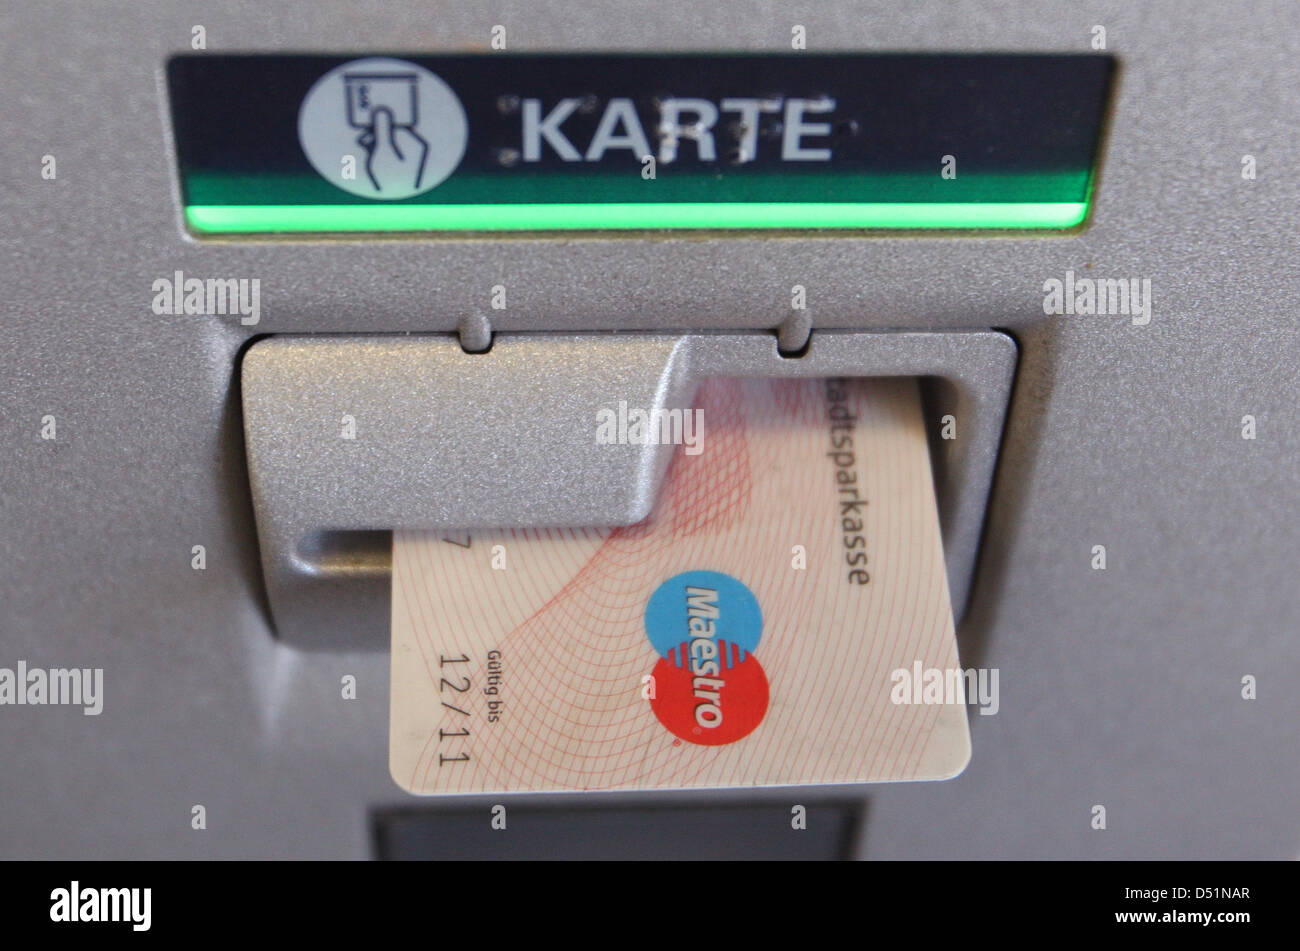 An ec card is situated in a cash machine of the bank Sparkasse in Kaufbeuren, Germany, 07 January 2010. The fee for taking money from external banks will be indicated on a display from 15 January onwards. Photo: Karl-Josef Hildenbrand Stock Photo